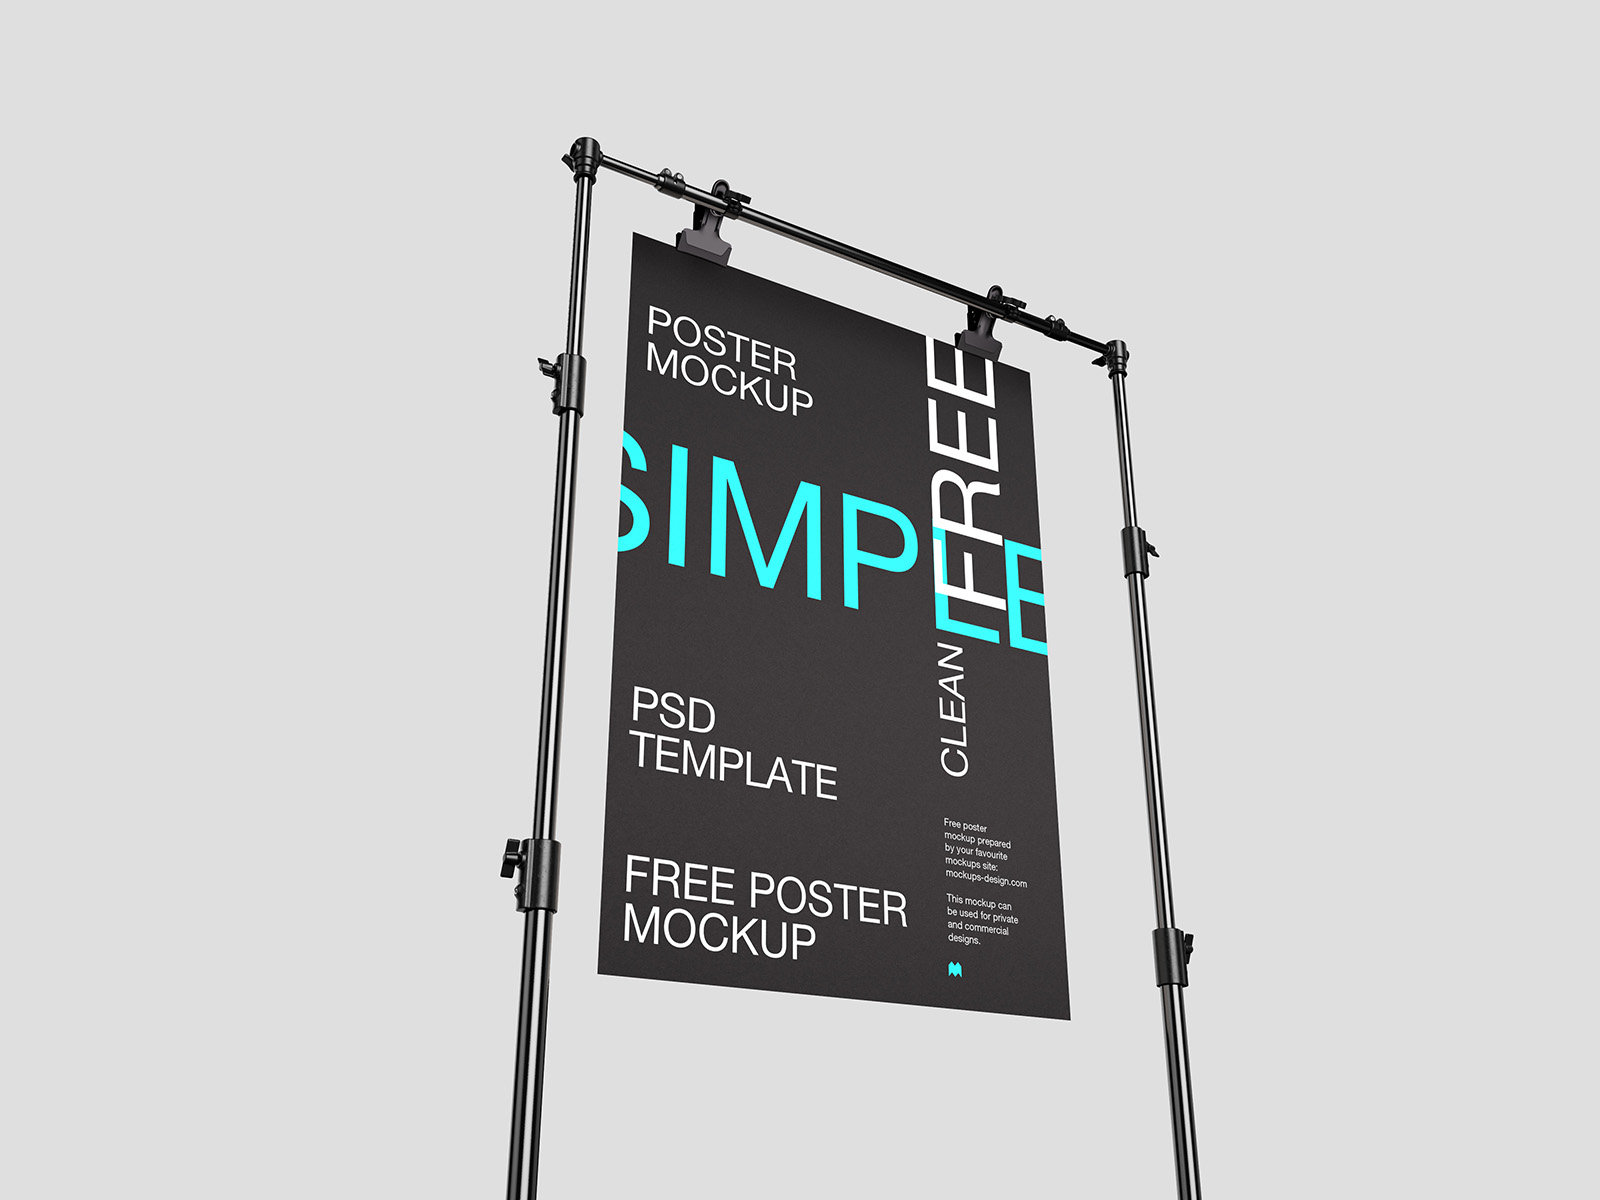 Poster Mockup on Tripod in 5 Showcases FREE PSD